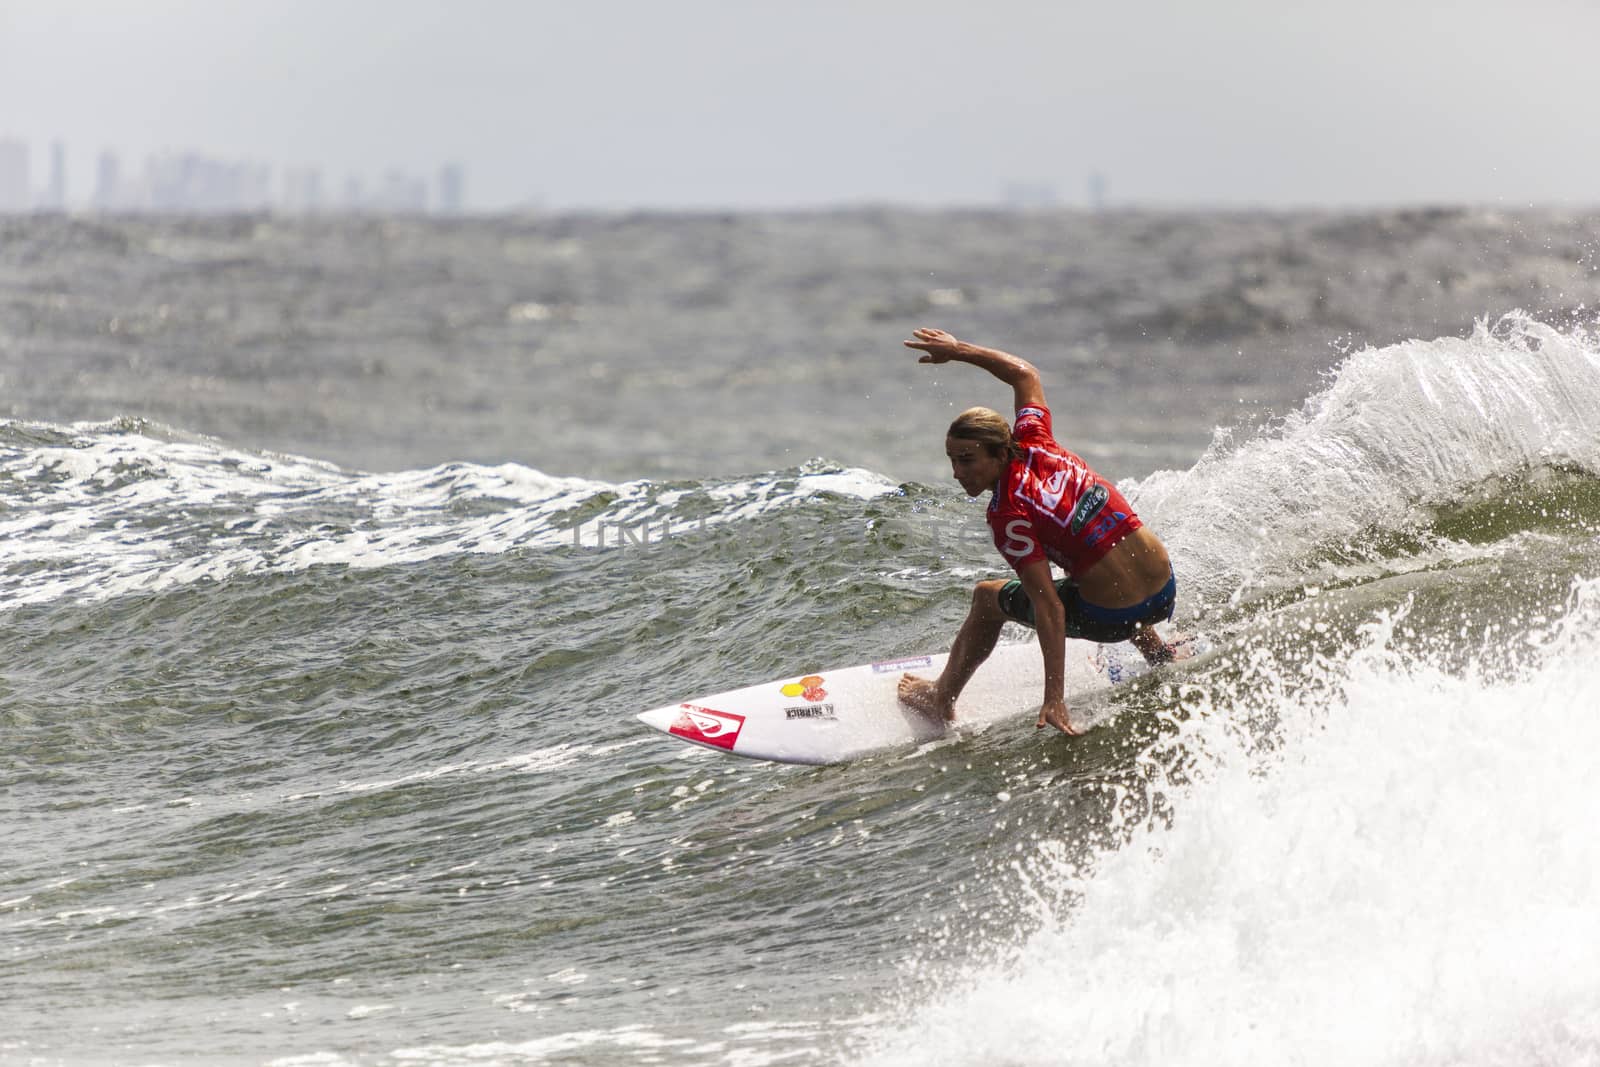 Surfer races the Quicksilver & Roxy Pro World Title Event by Imagecom